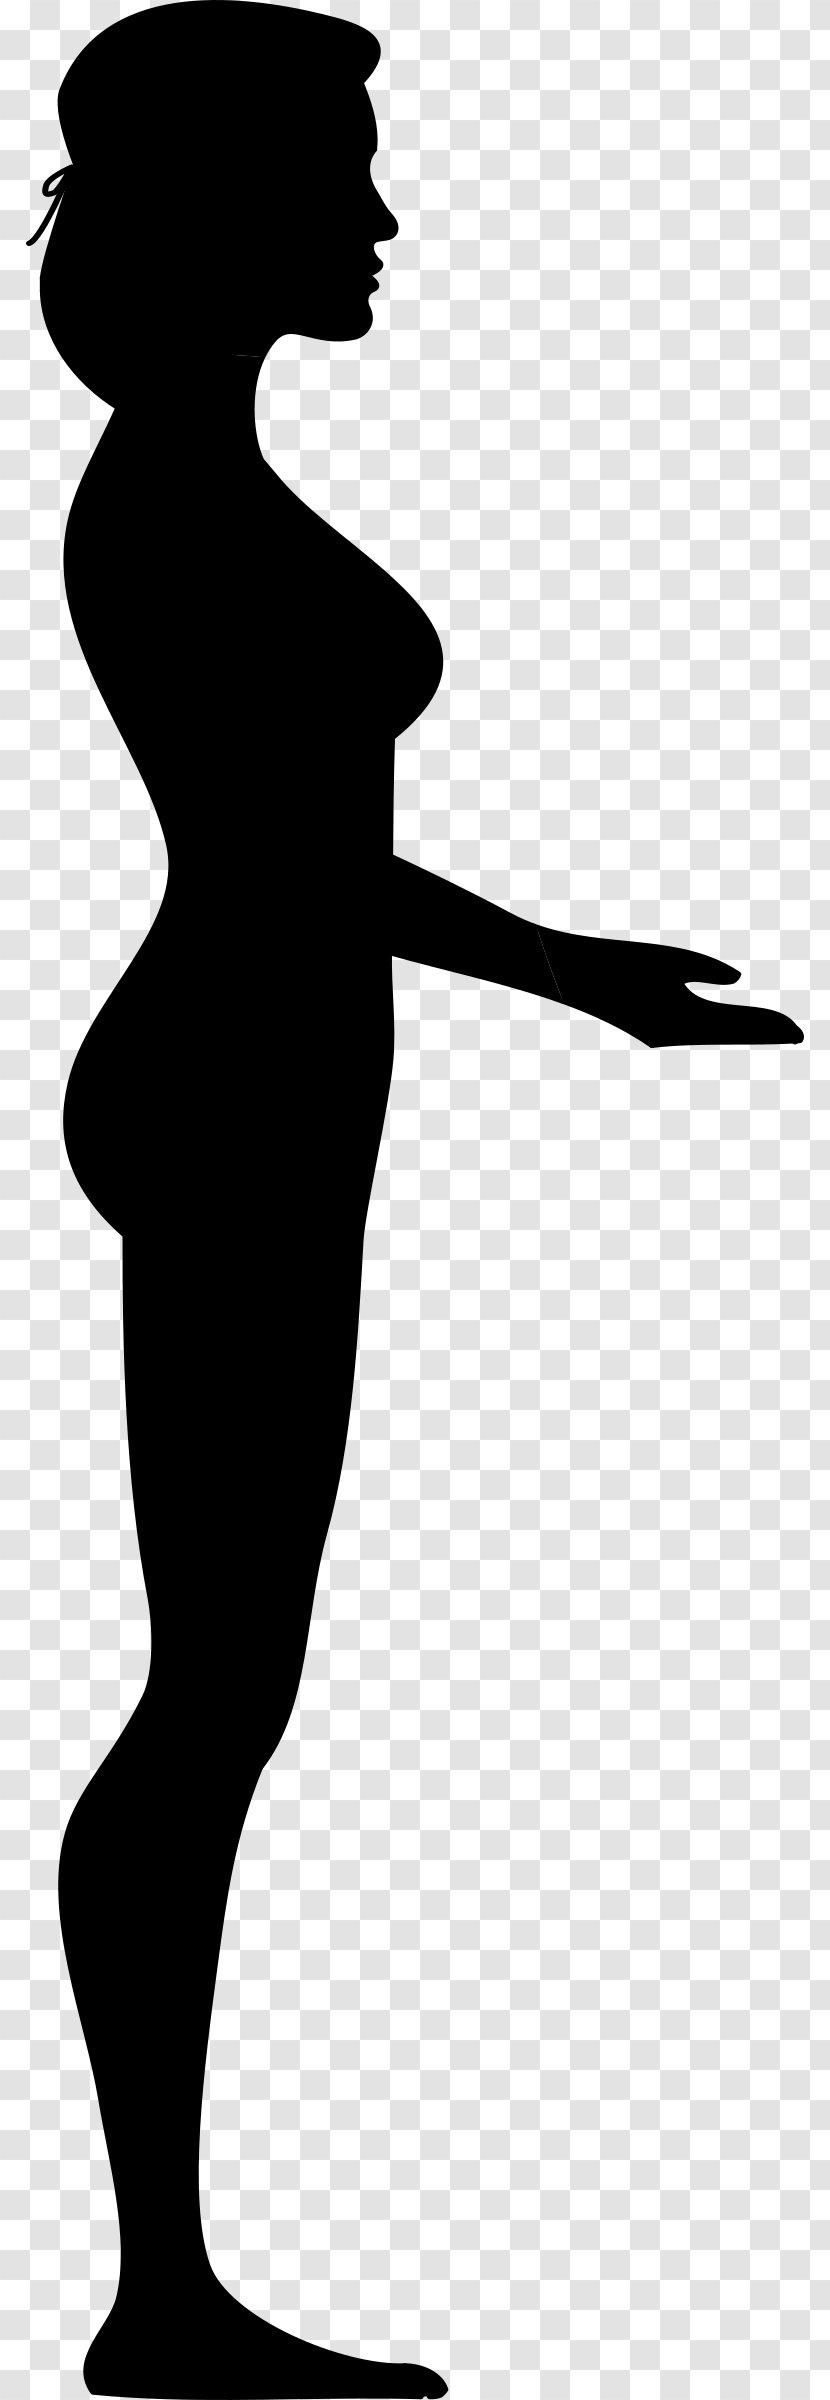 Silhouette Woman Black And White Clip Art - Cartoon - Ladies Transparent PNG